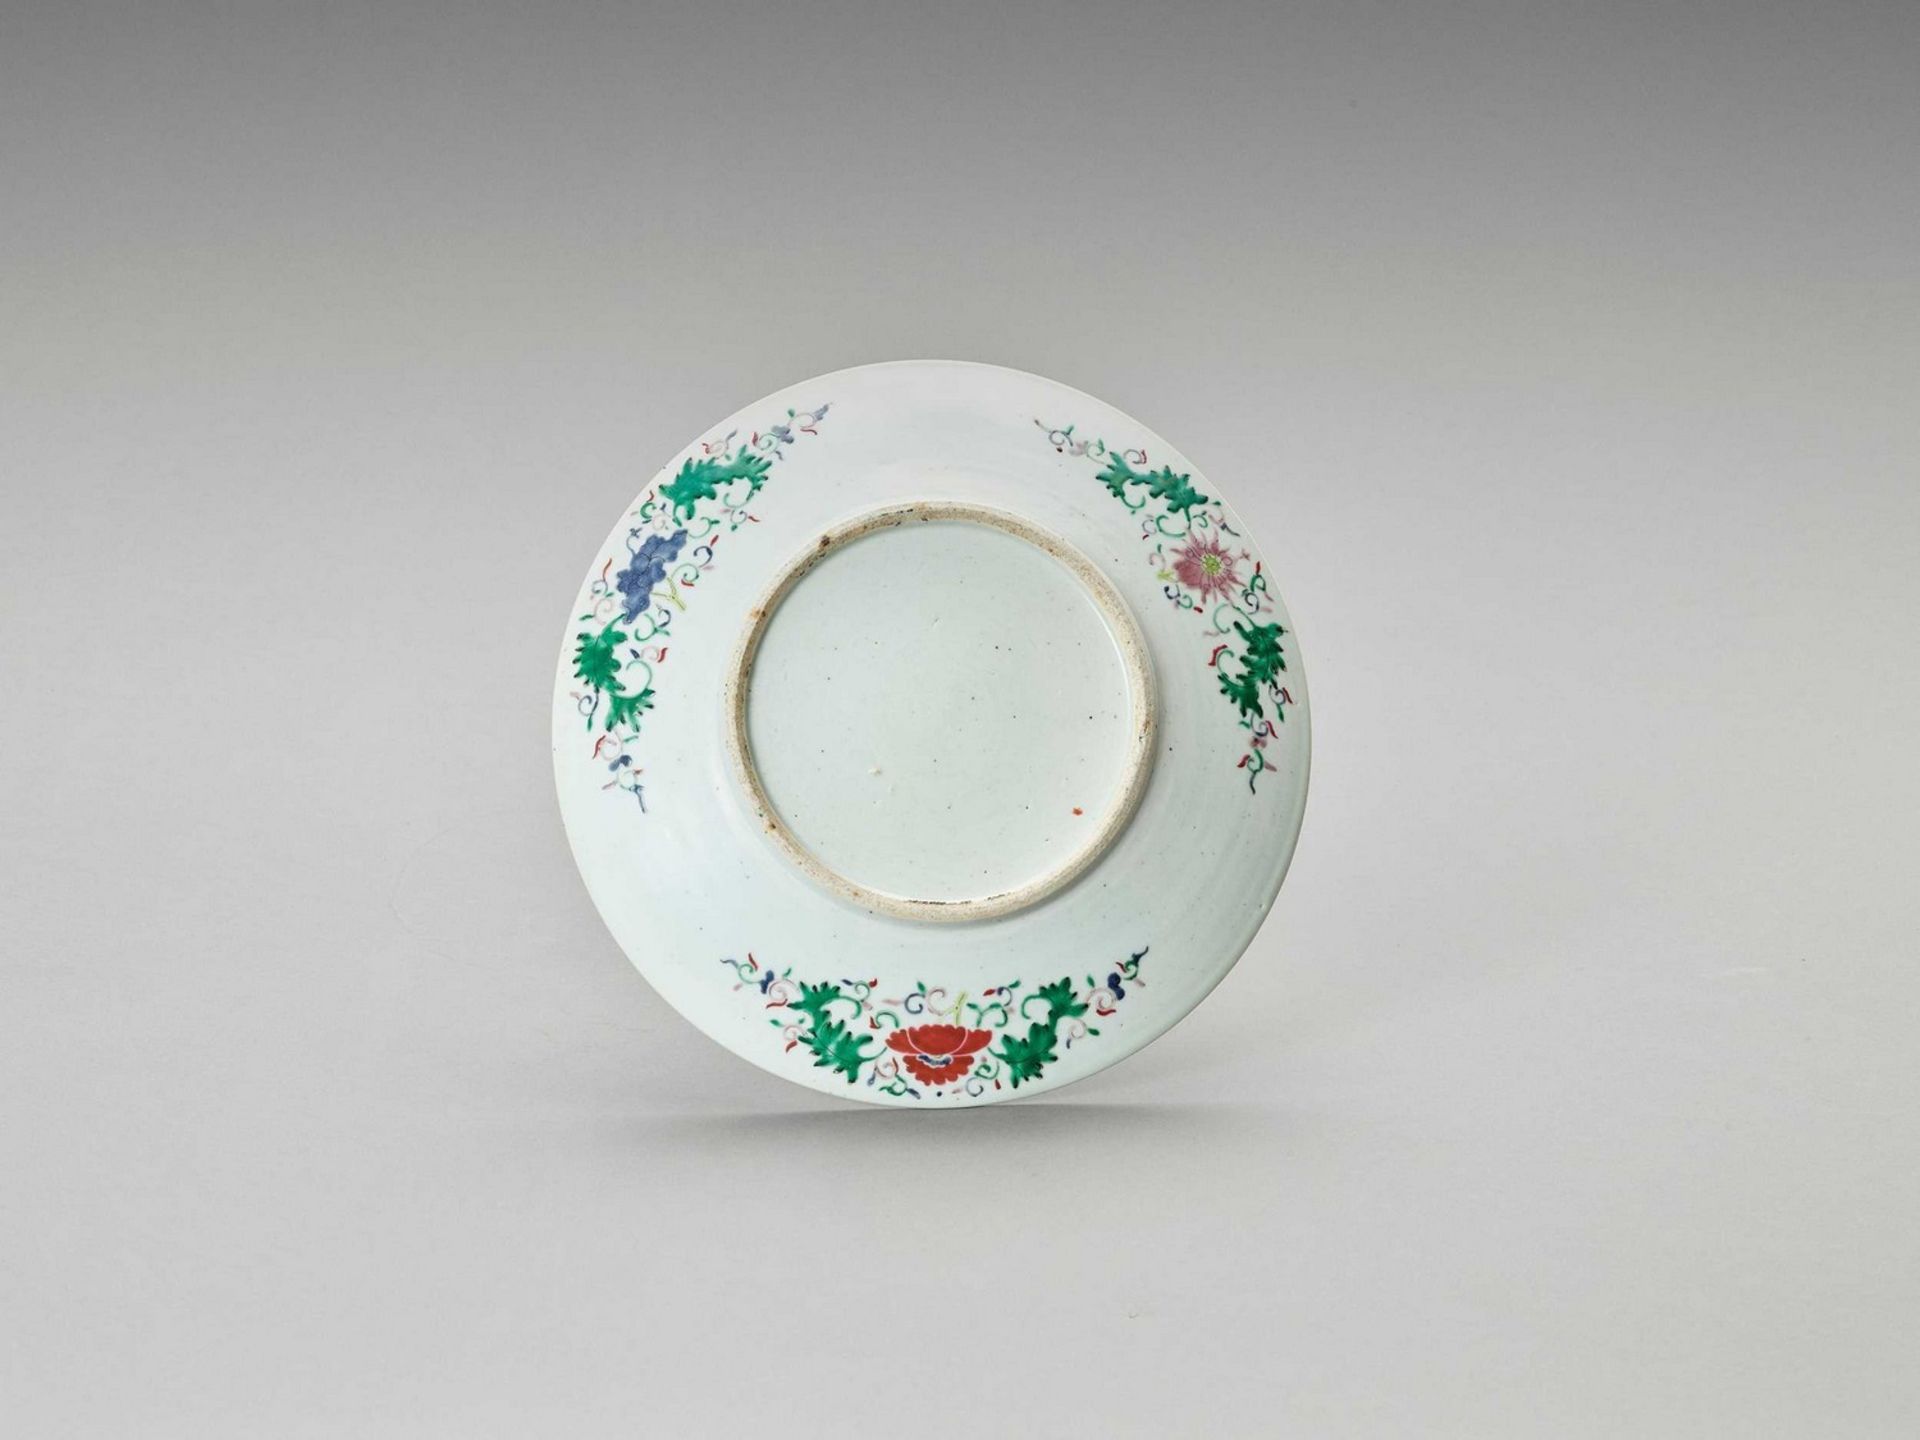 A FAMILLE VERTE PORCELAIN ‘BIRDS AND FLOWERS’ DISH, QING - Image 3 of 4